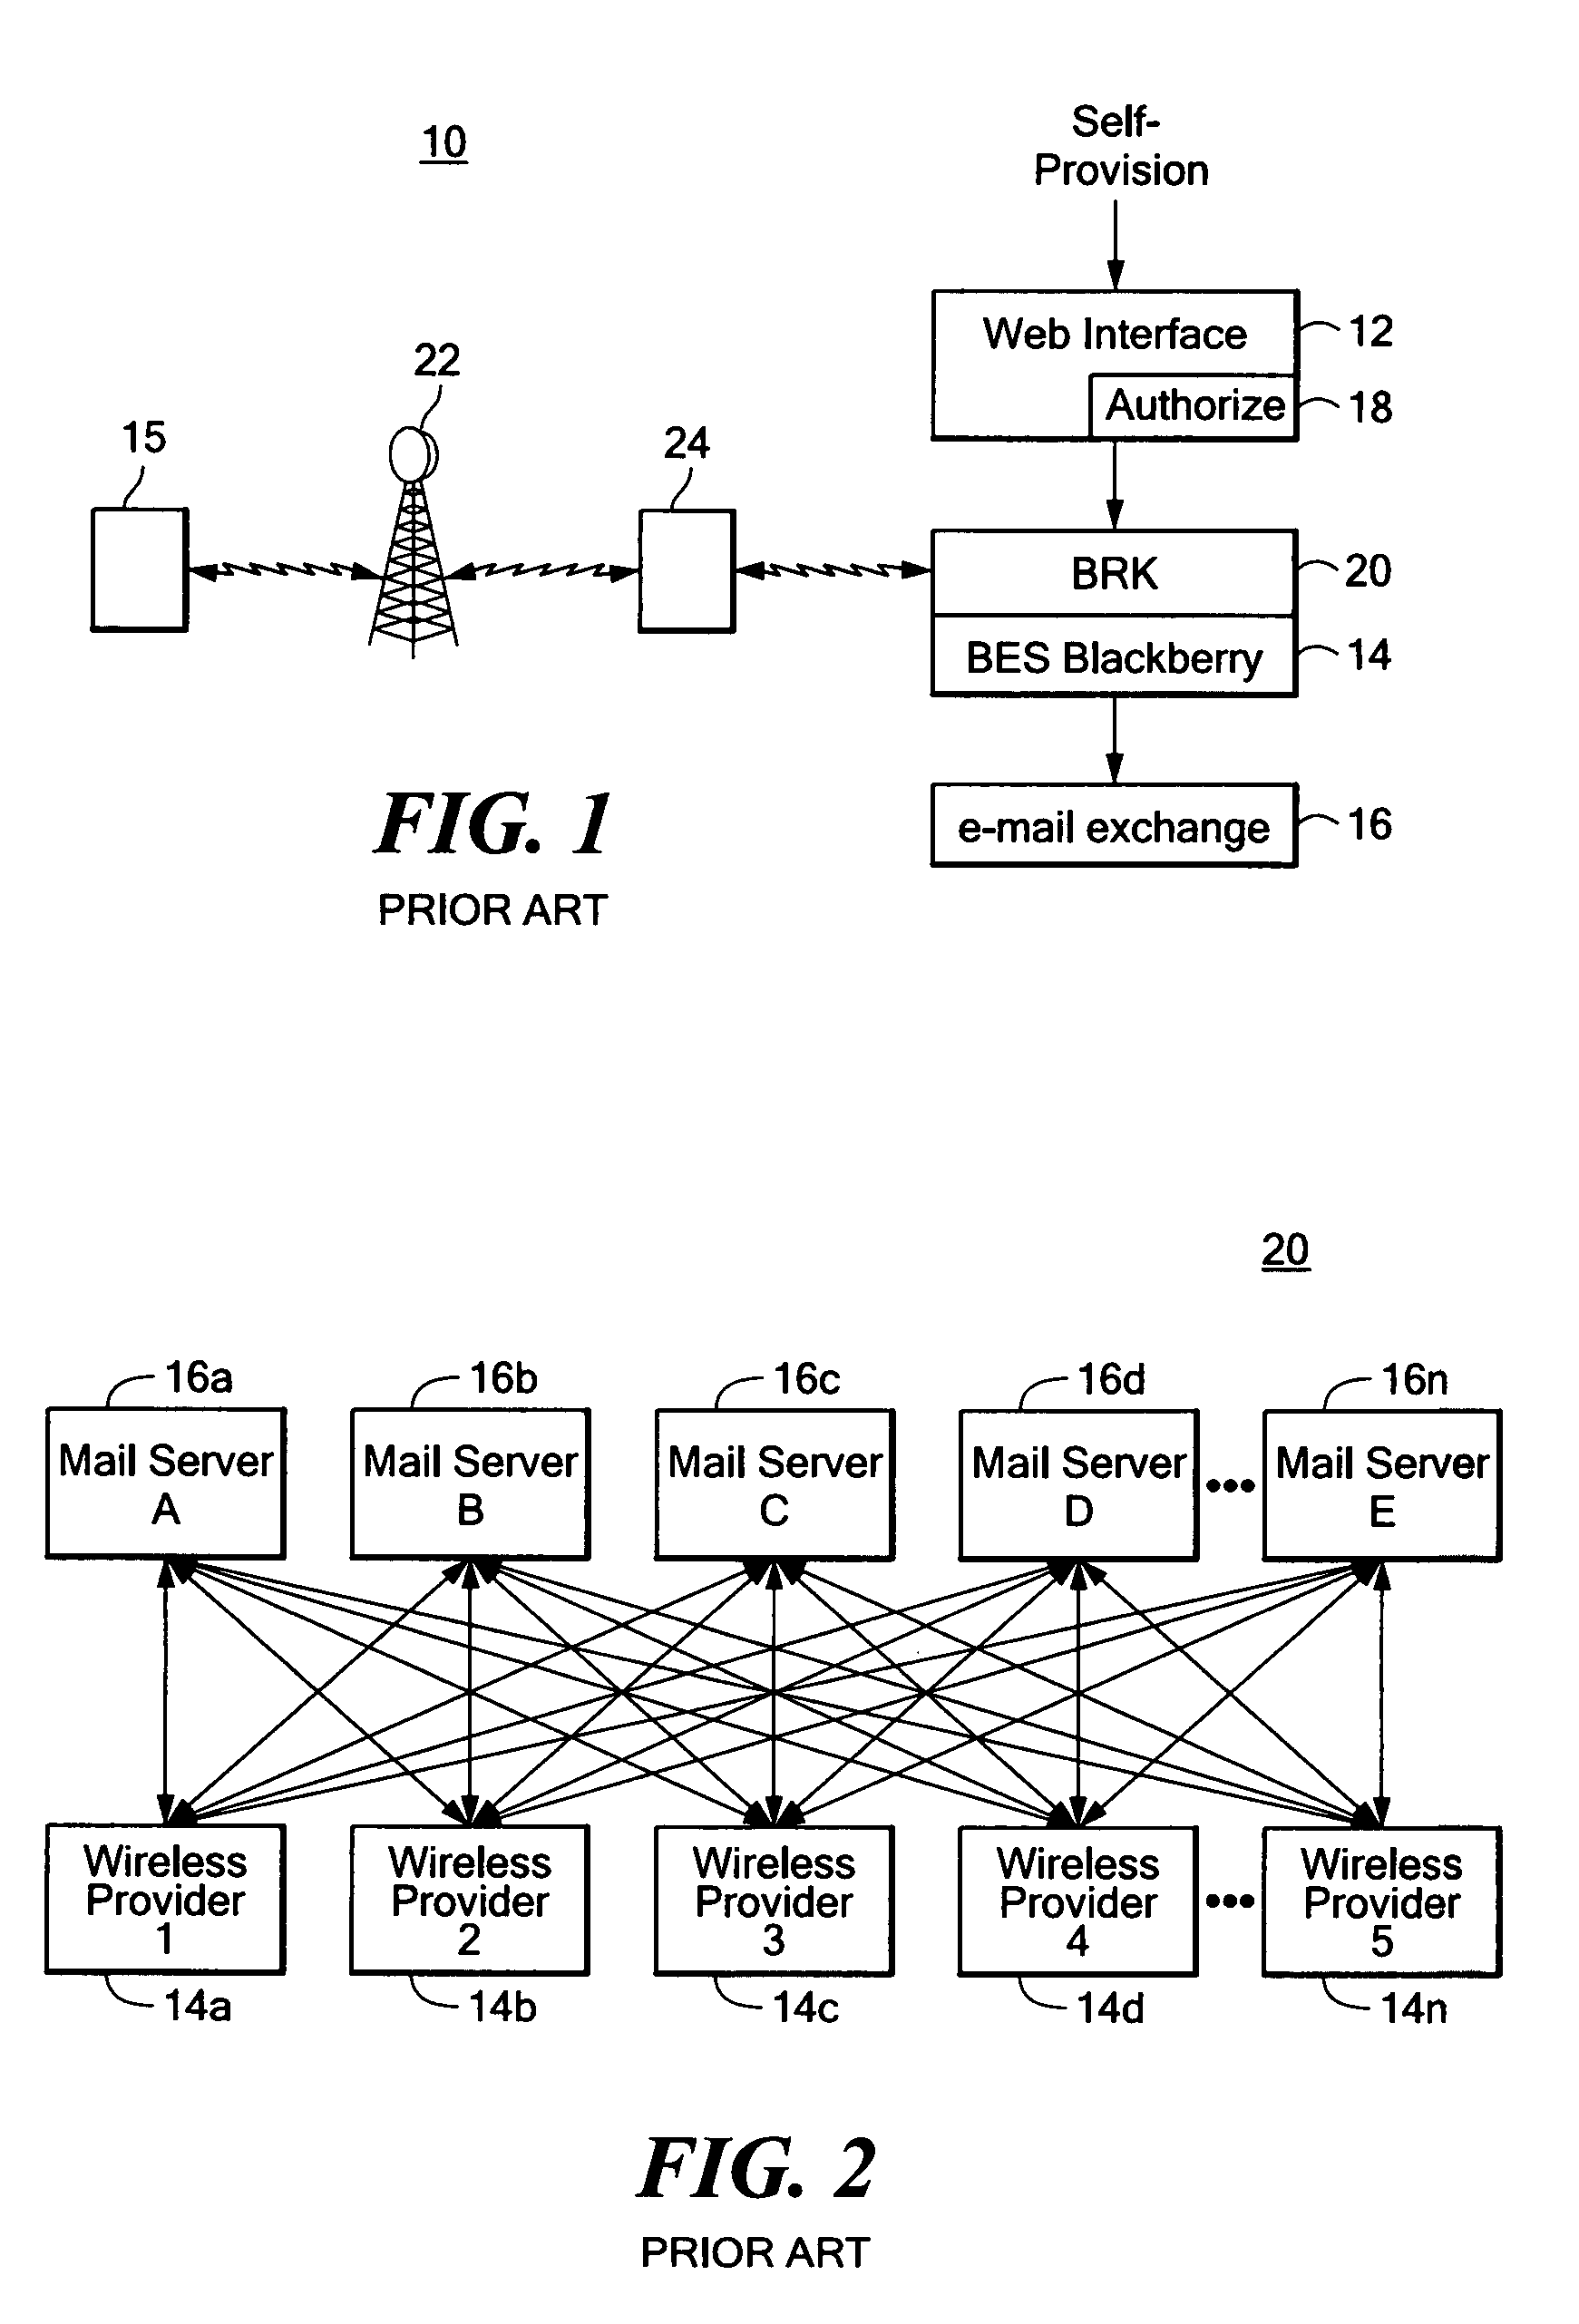 Apparatus and method for provisioning wireless data communication devices